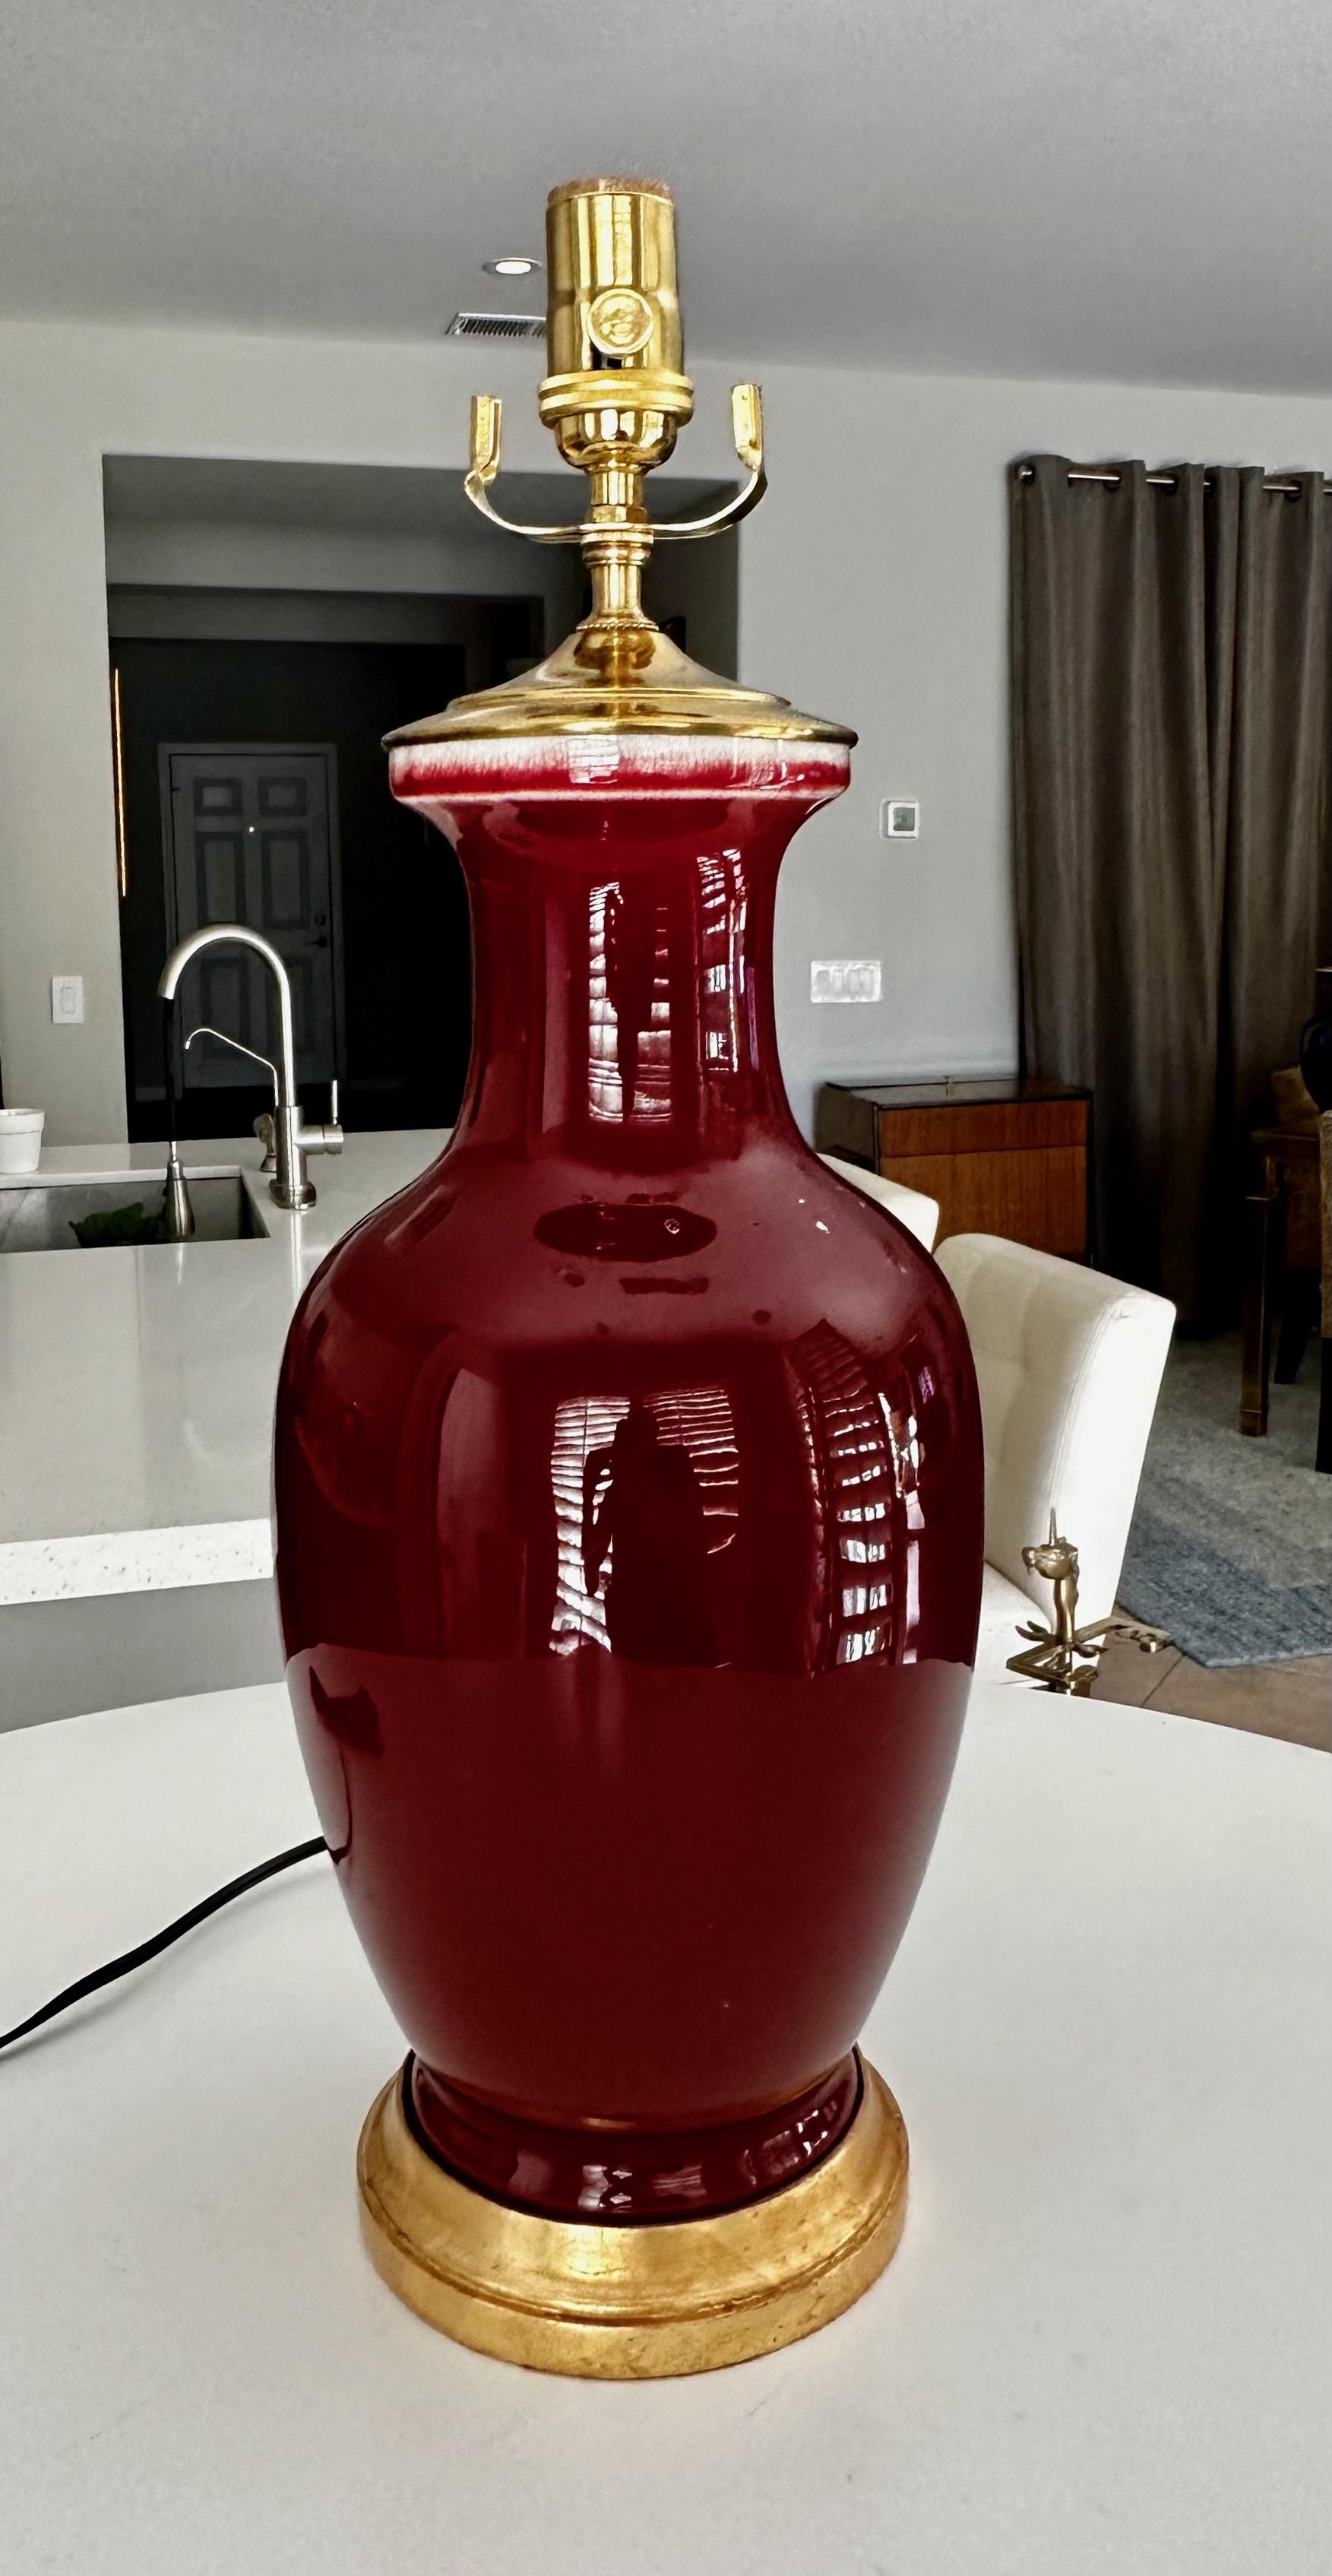 Single Chinese Asian Sang de Boeuf oxblood porcelain vase mounted on gilt turned wood lamp base by. Rewired with new 3 way brass socket and cord.
Measures: Height top of socket 20.5